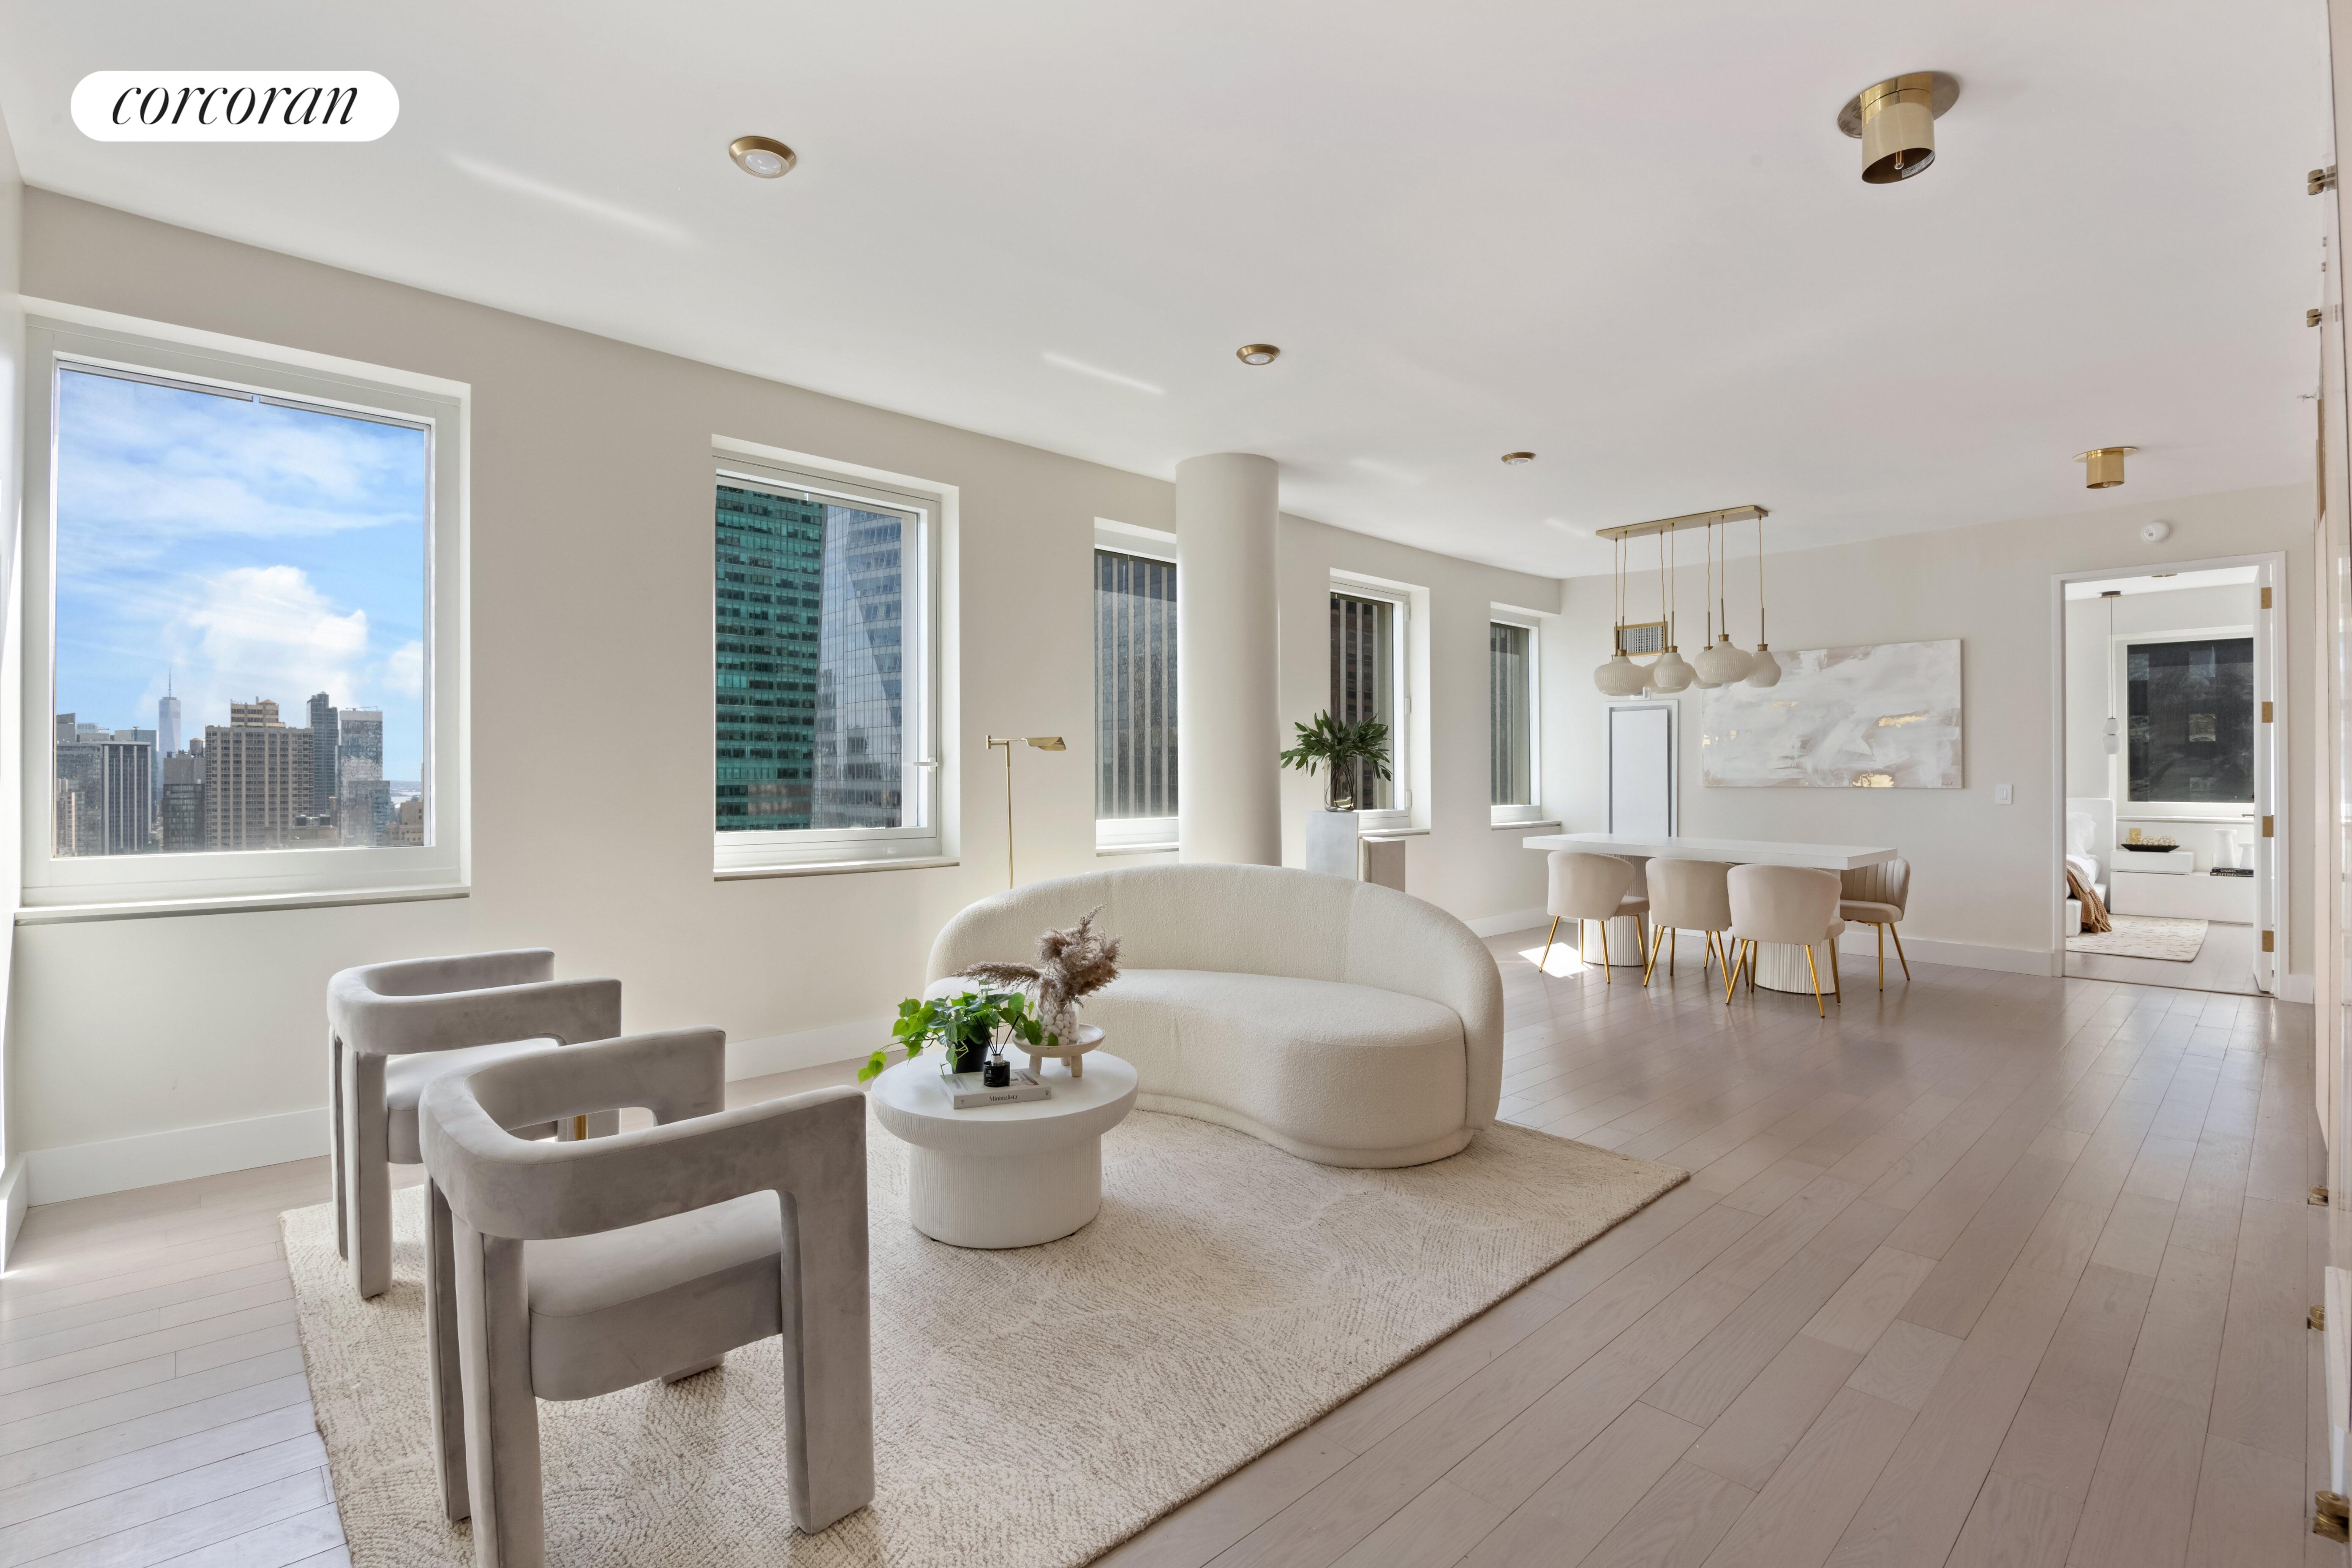 70 West 45th Street 40B, Chelsea And Clinton, Downtown, NYC - 2 Bedrooms  
2 Bathrooms  
3 Rooms - 